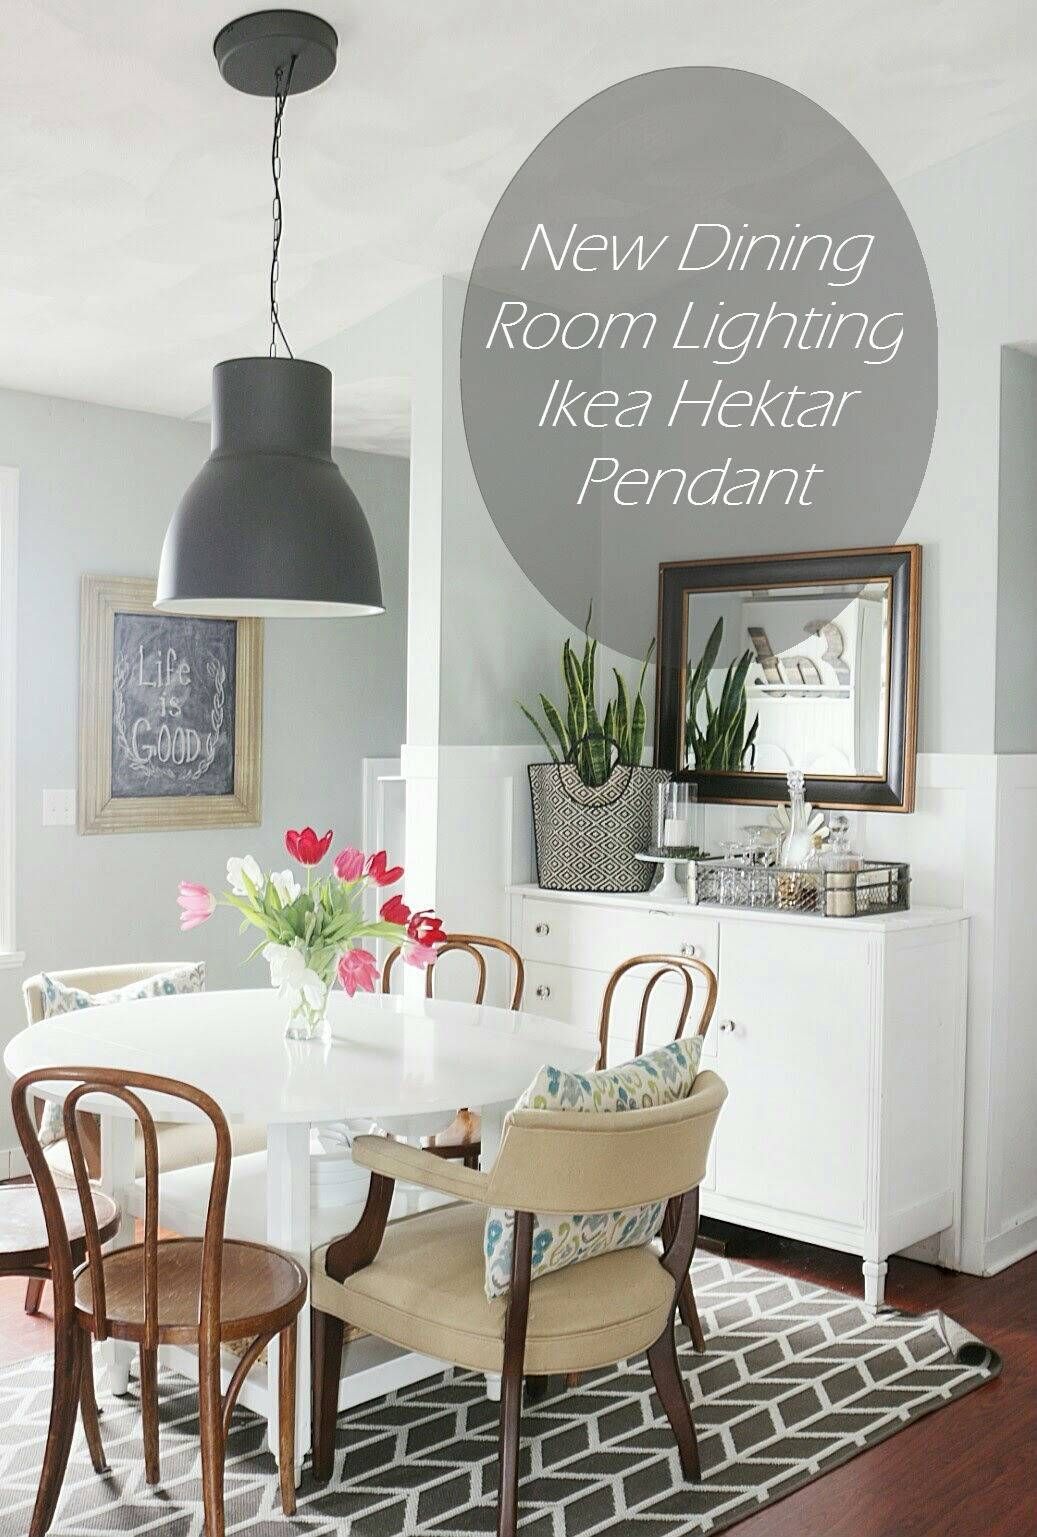 New Dining Room Lighting, Ikea Hektar Pendant – Fearfully With Ikea Drum Lights (View 13 of 15)